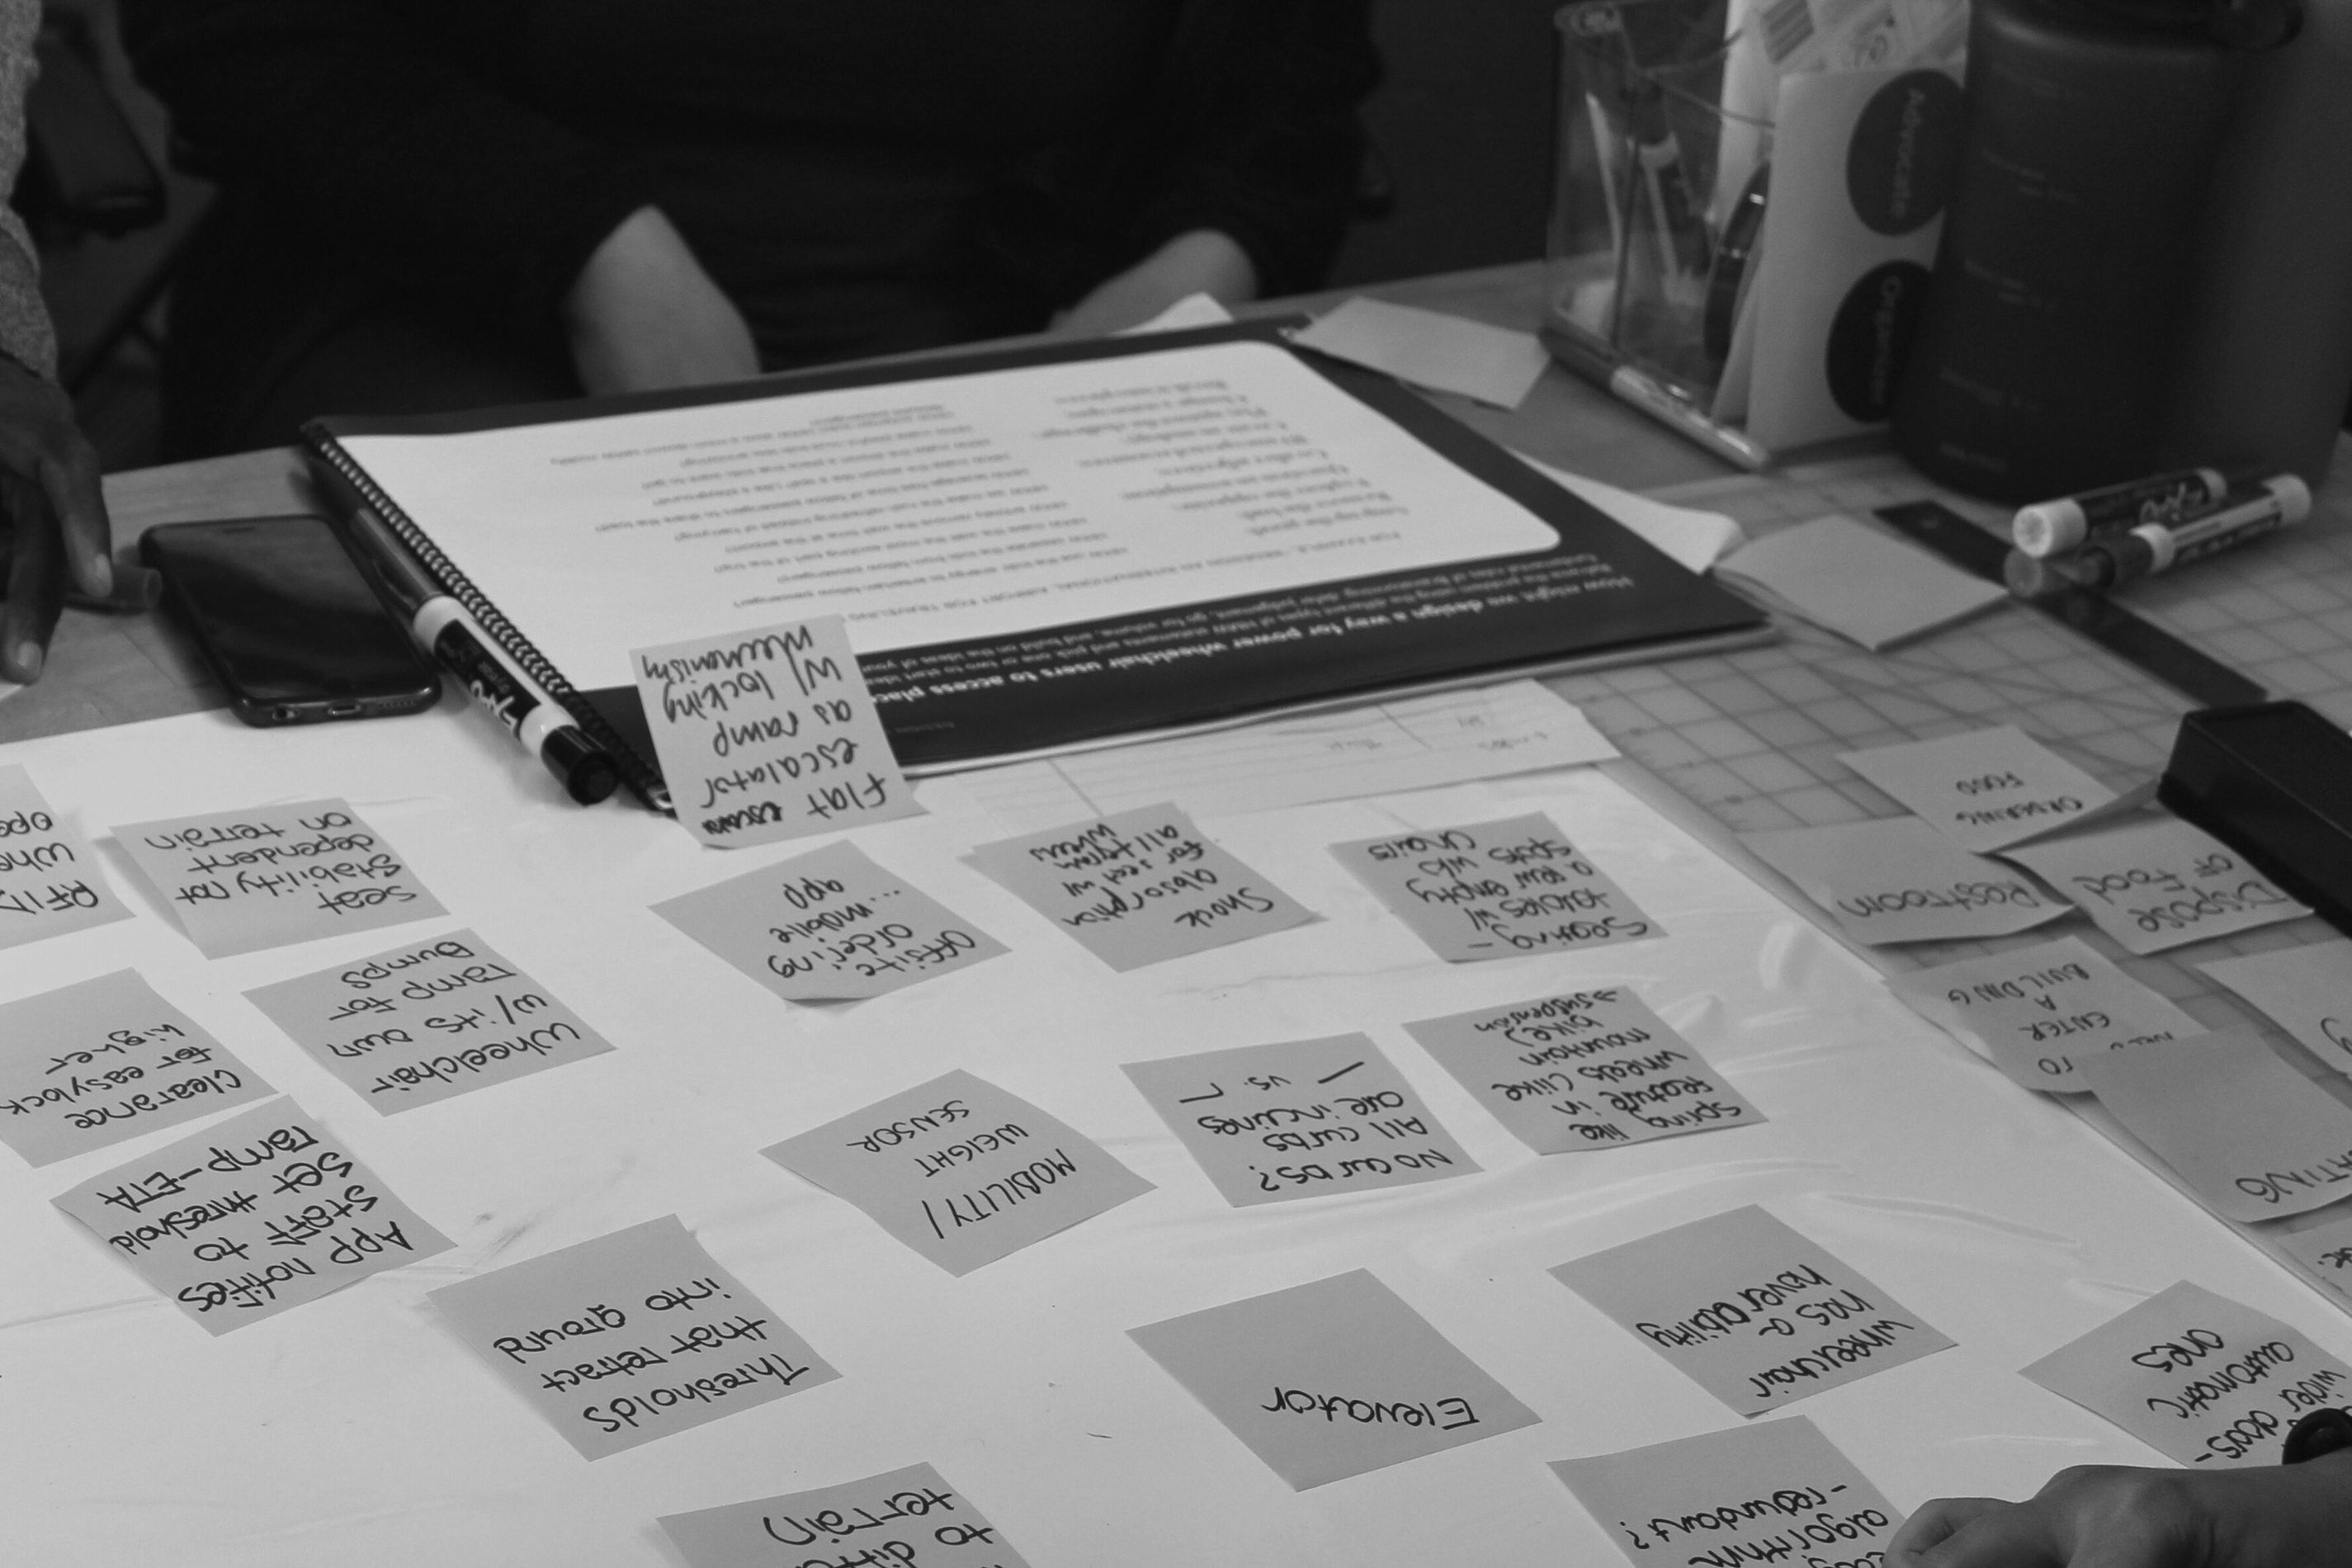 A design thinking booklet from the Illimitable workshops lays on the table surrounded by used sticky notes, grid paper, markers and other craft materials. A black man and white womans hands are visible in the background.